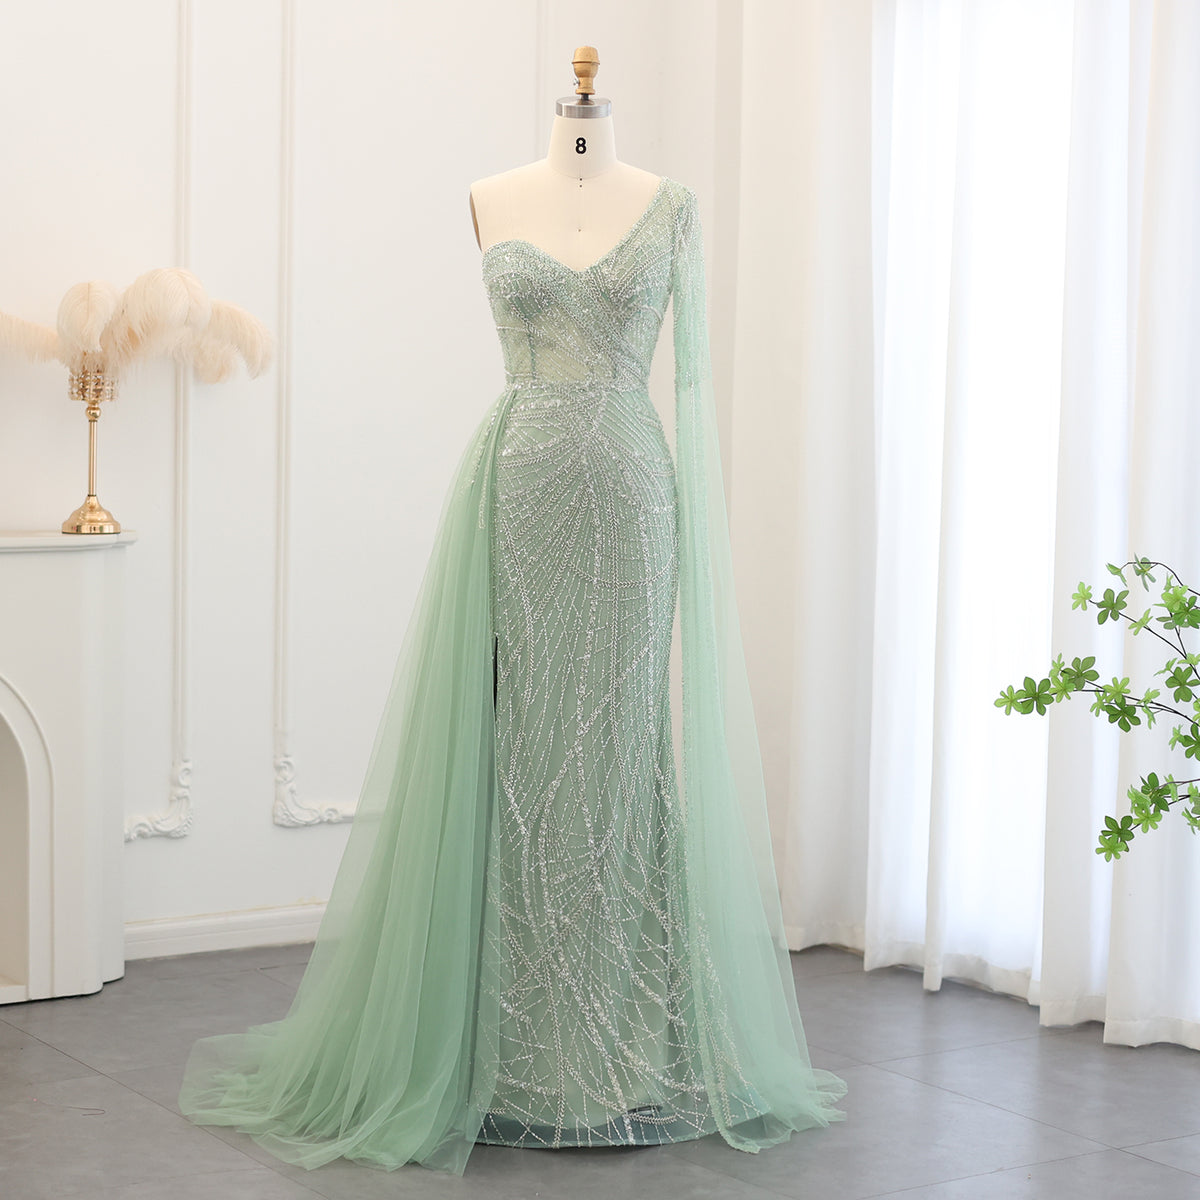 Sharon Said Luxury Mermaid One Shoulder Sage Green Evening Dress with Cape Sleeves Plus Size Women Blue Wedding Party Gown SS054